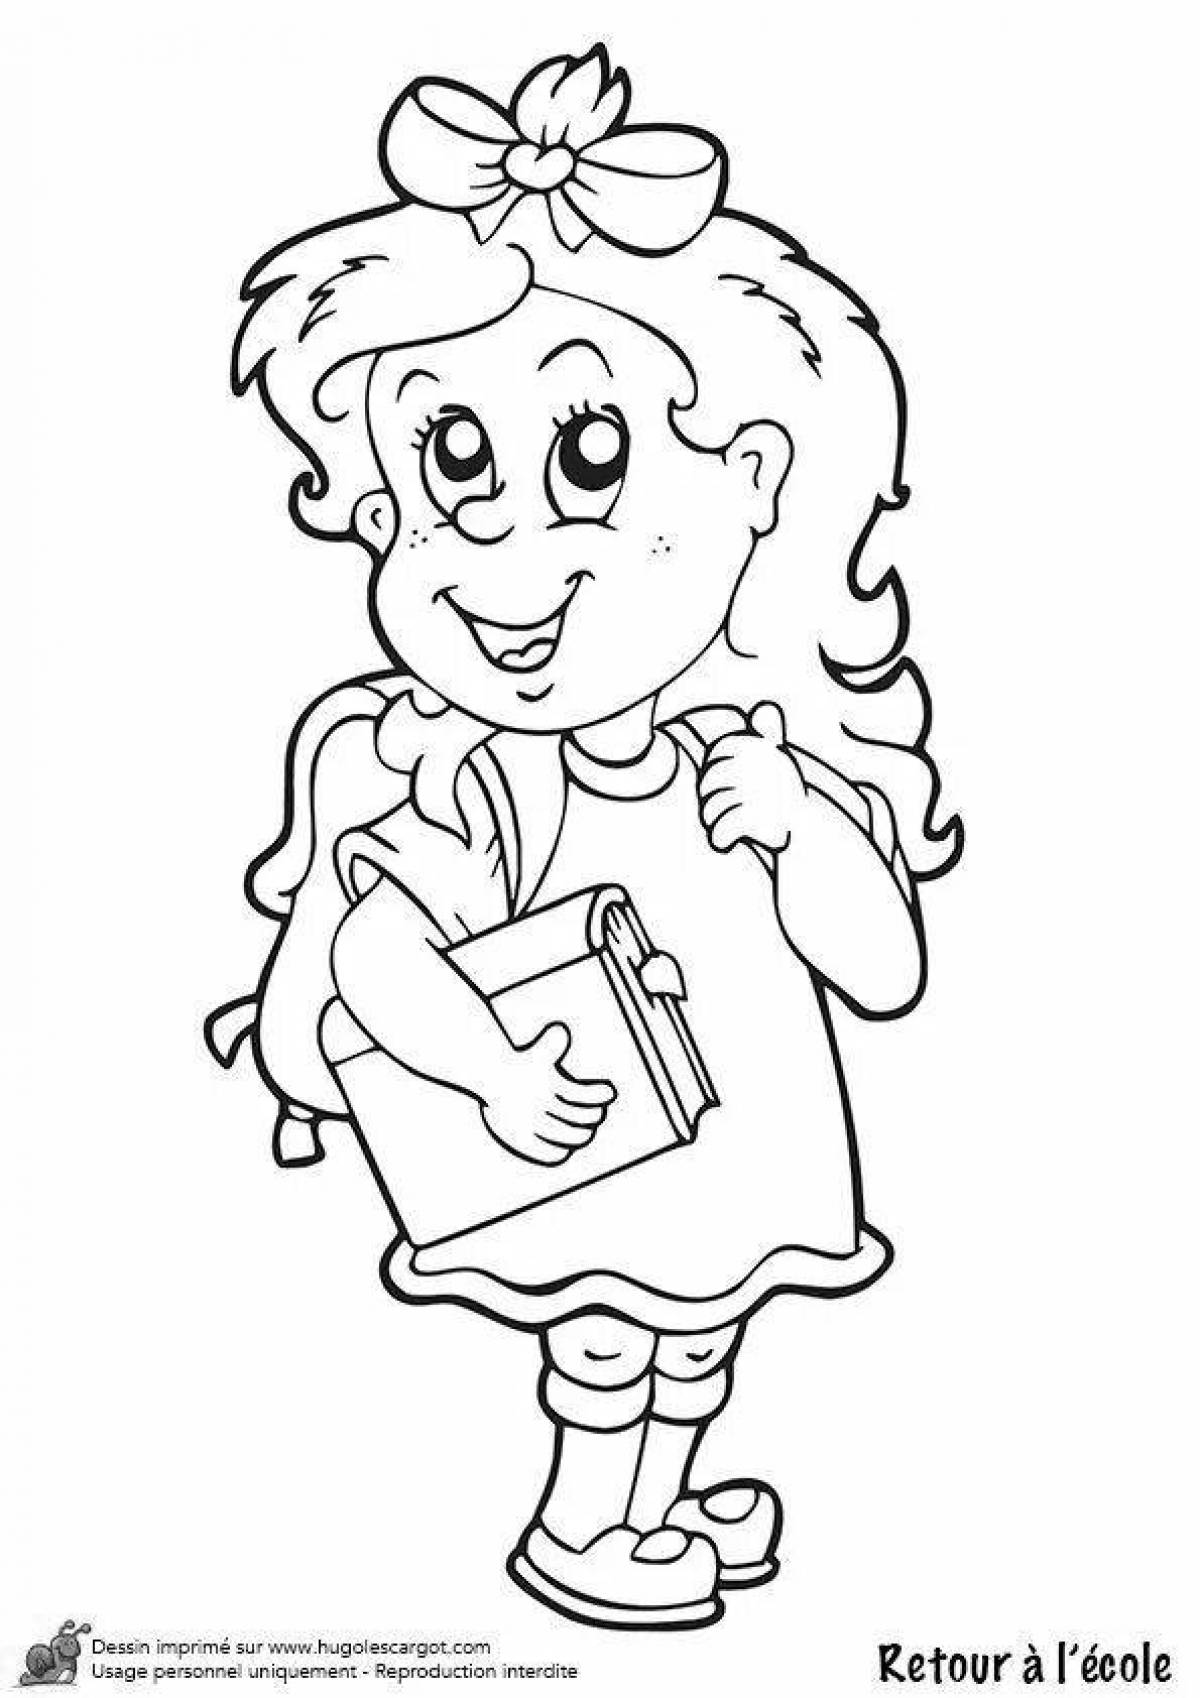 Coloring page excited schoolgirl